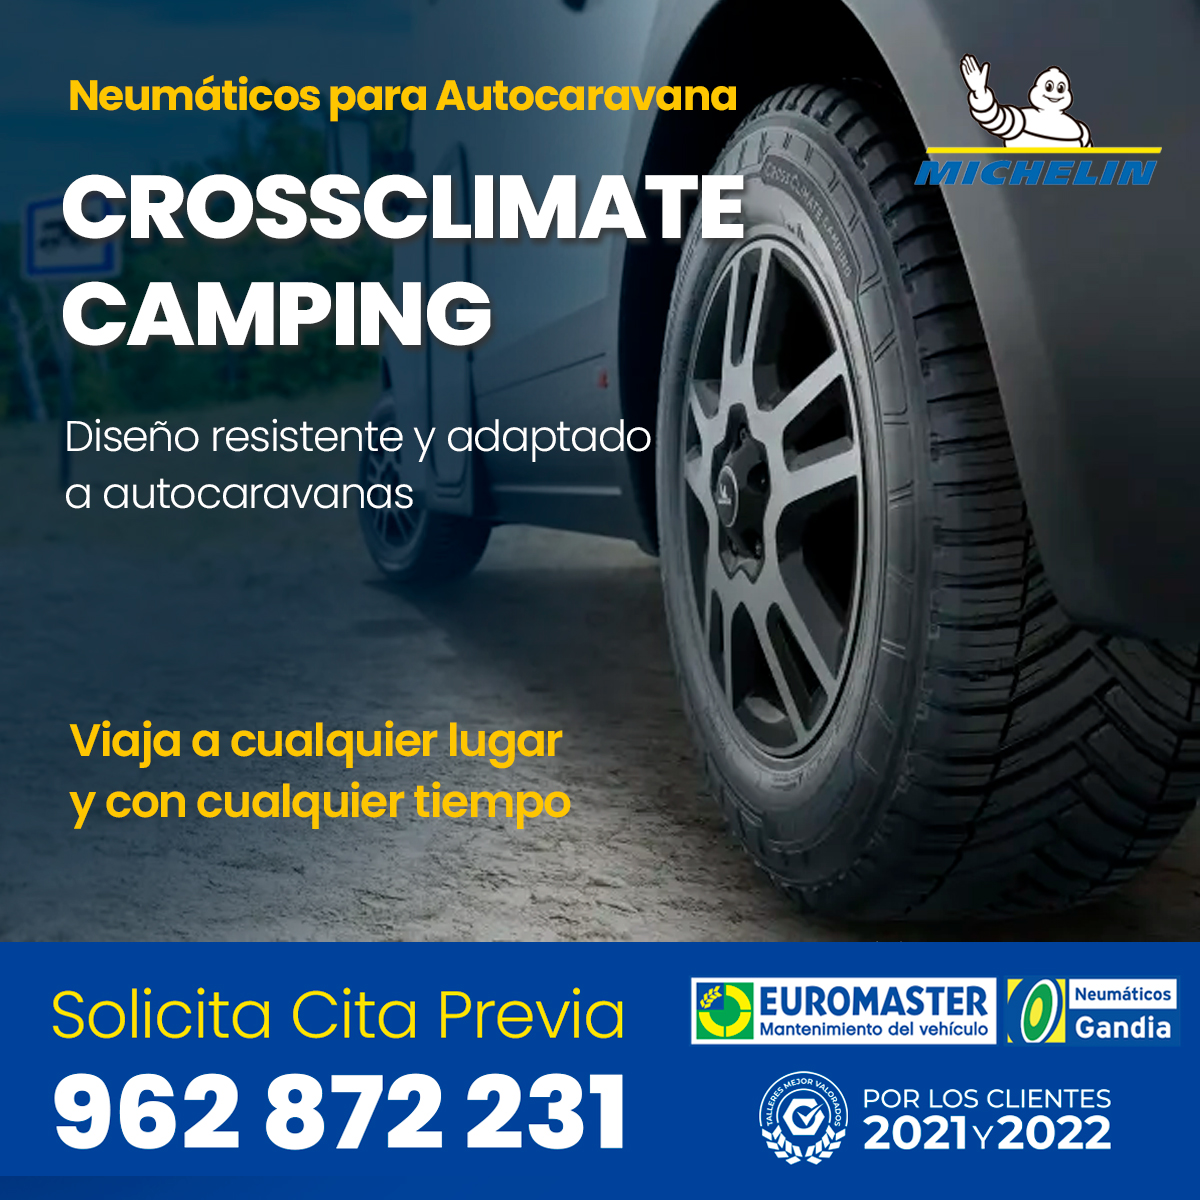 CROSSCLIMATE CAMPING